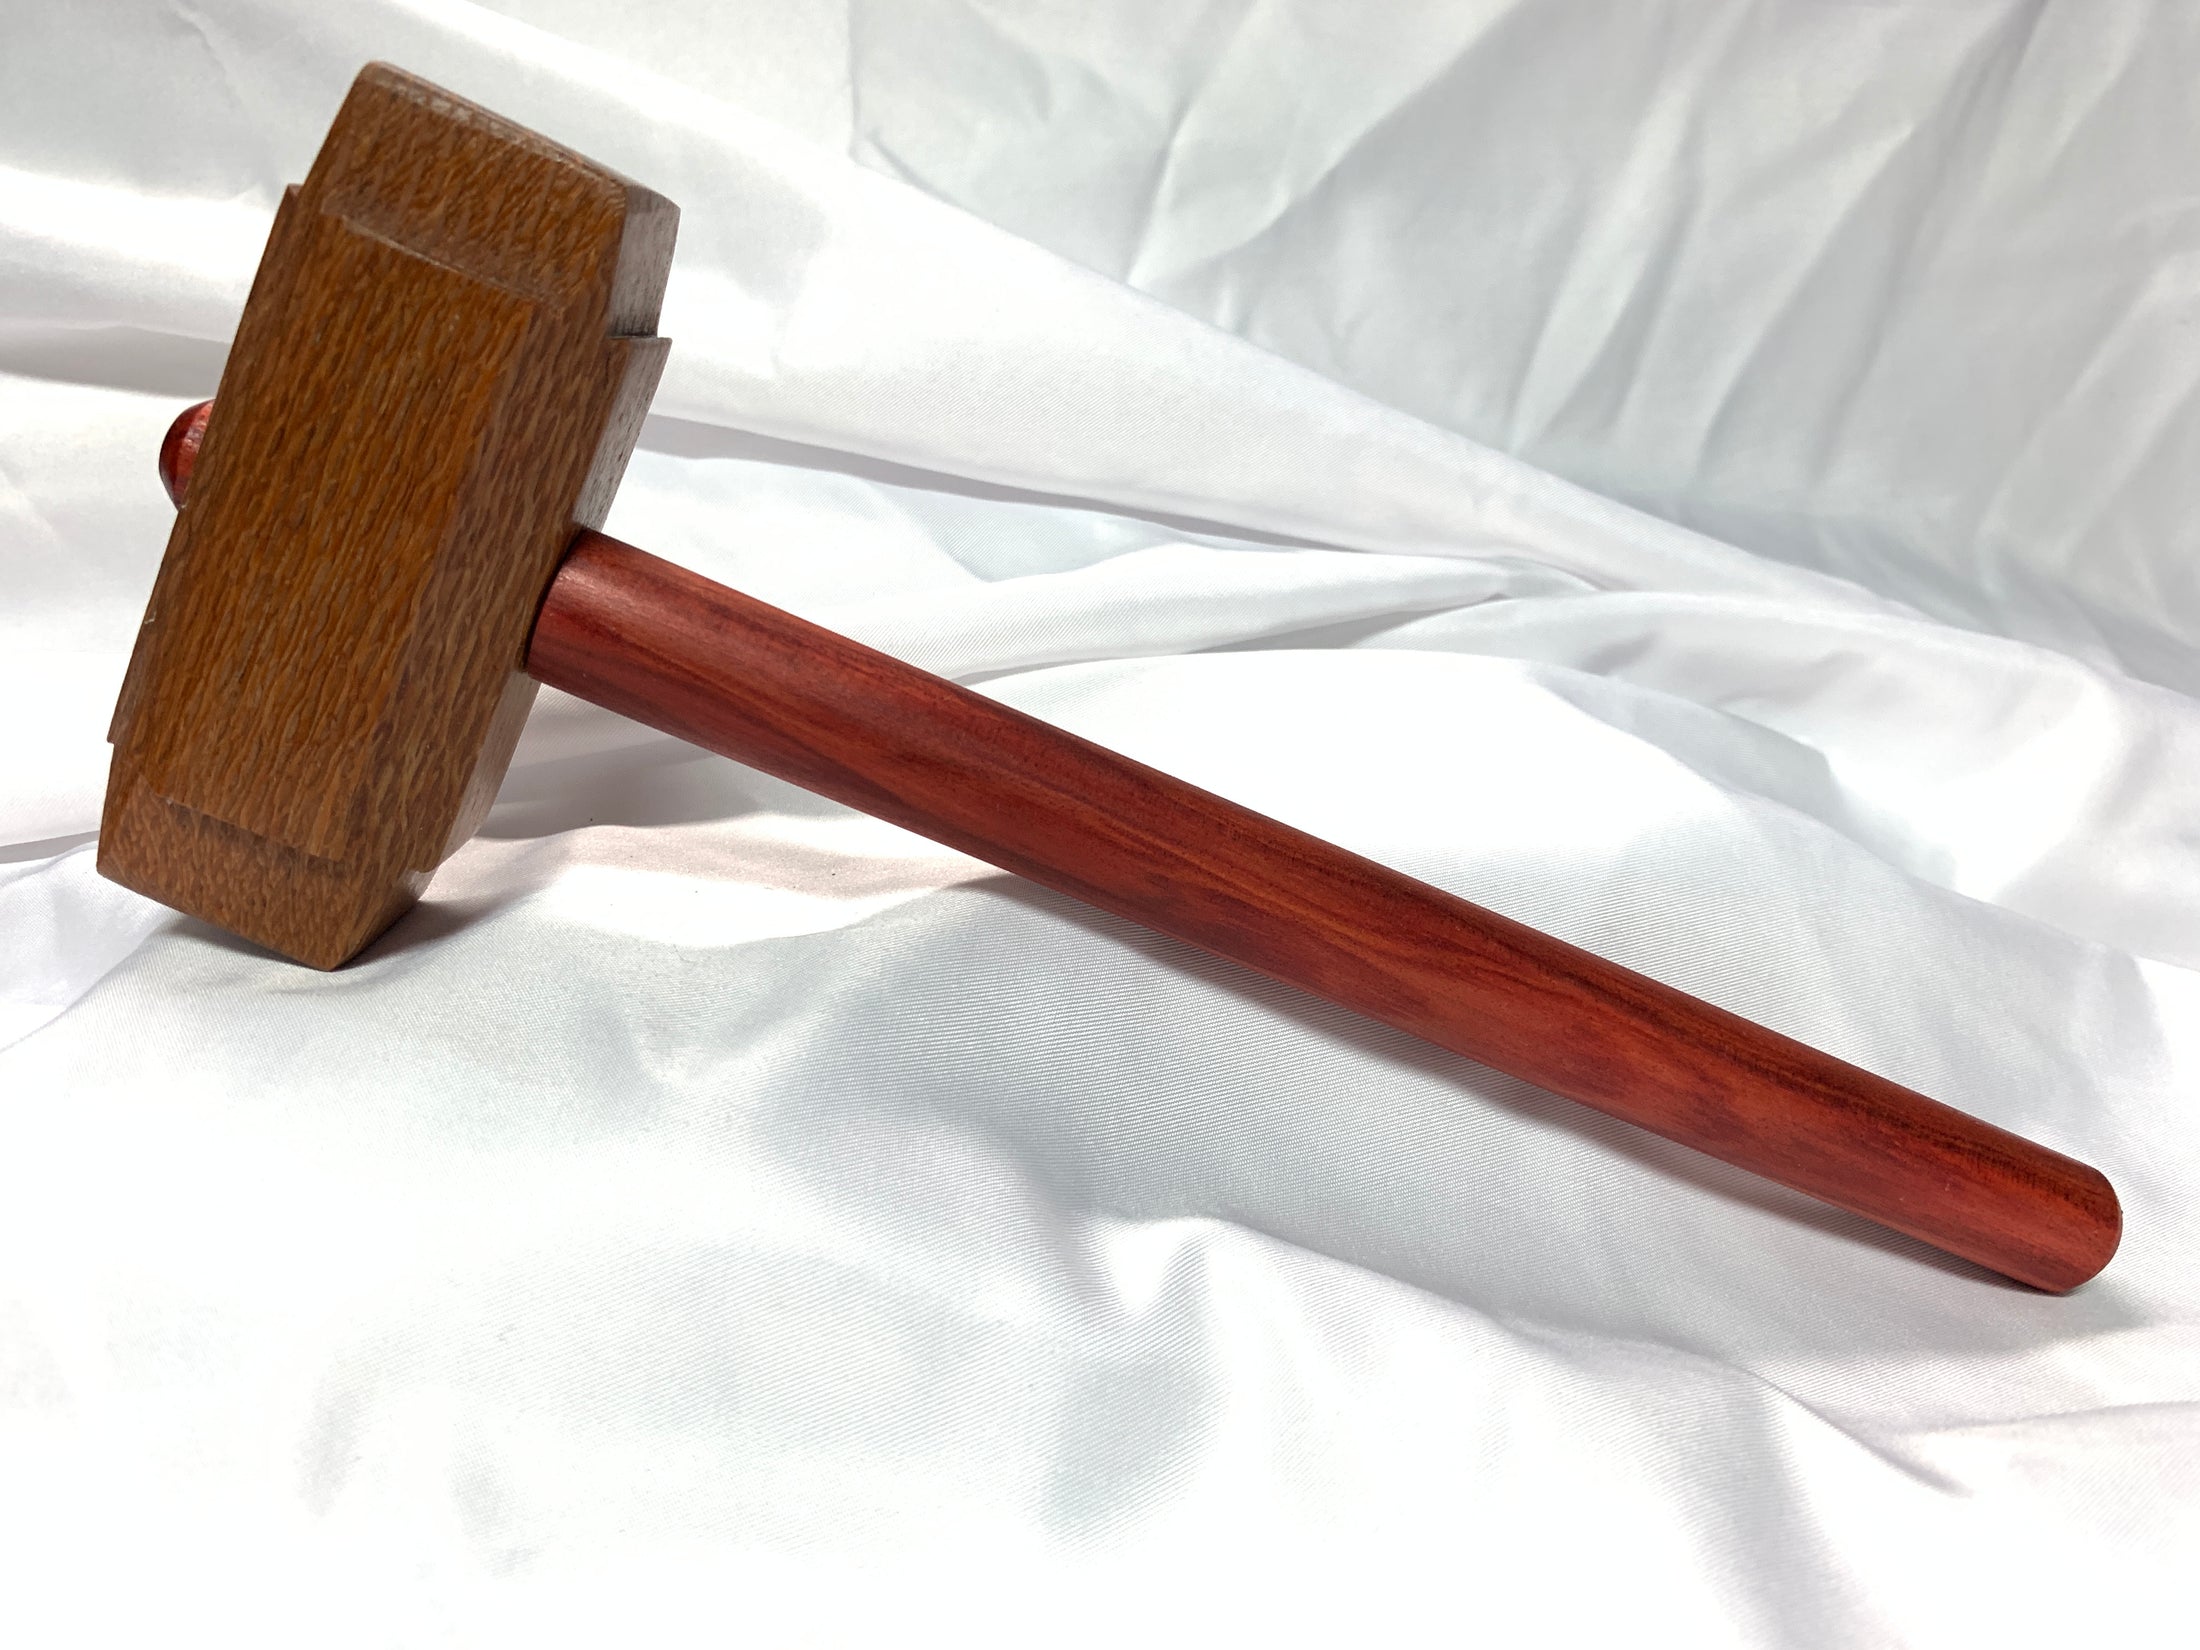 Thors Hammer Woodworking Mallet Leopardwood Head with Redheart Handle Kings Fine Woodworking